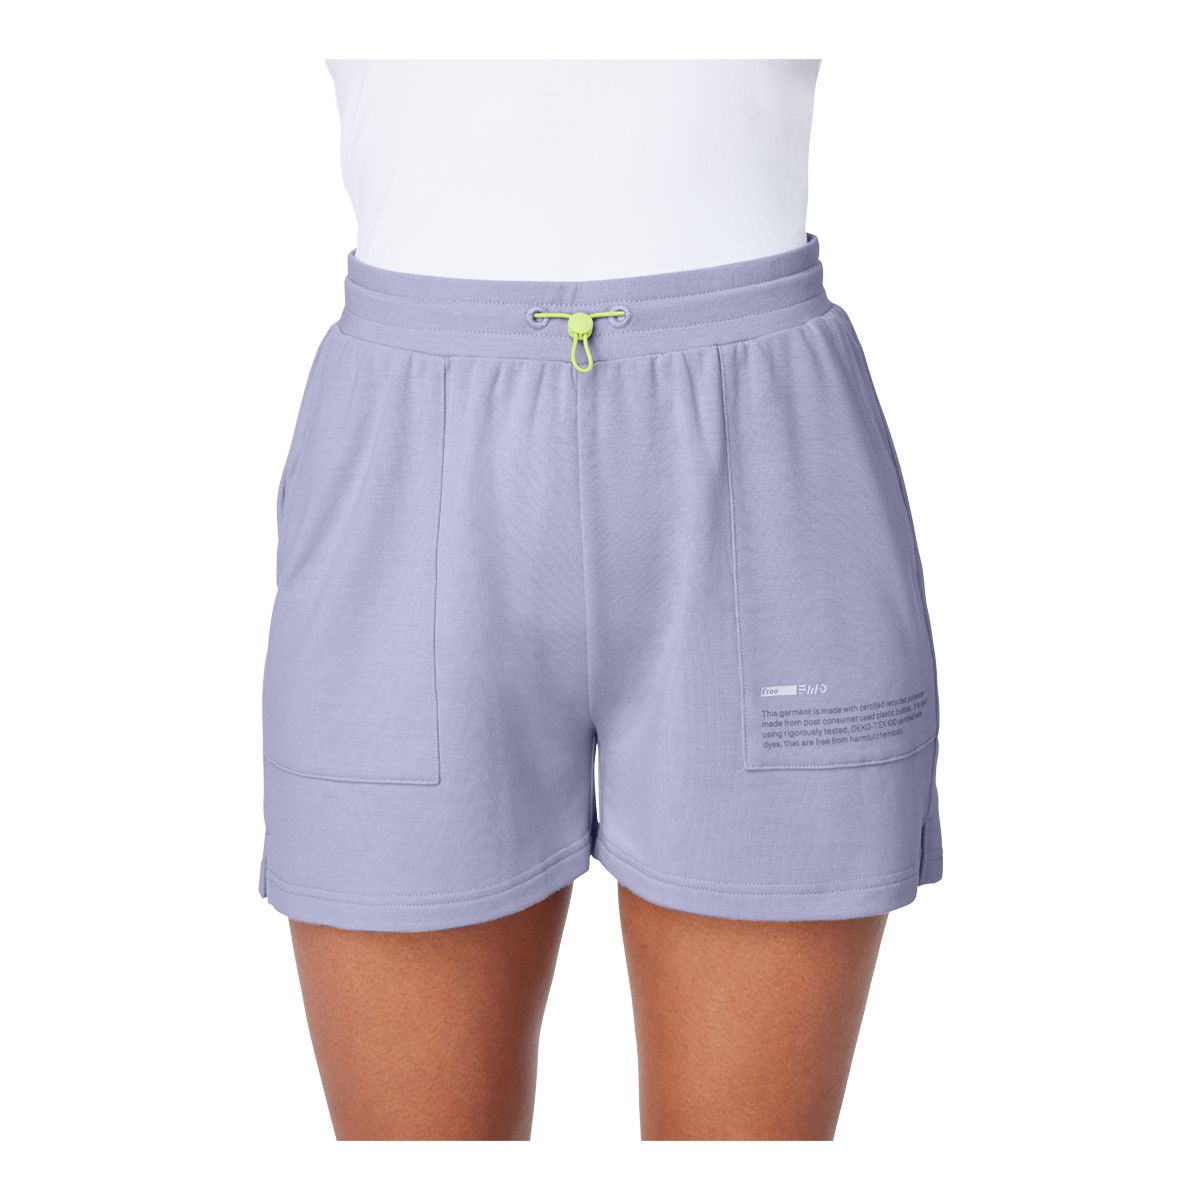 FWD Women's Free Terry Shorts